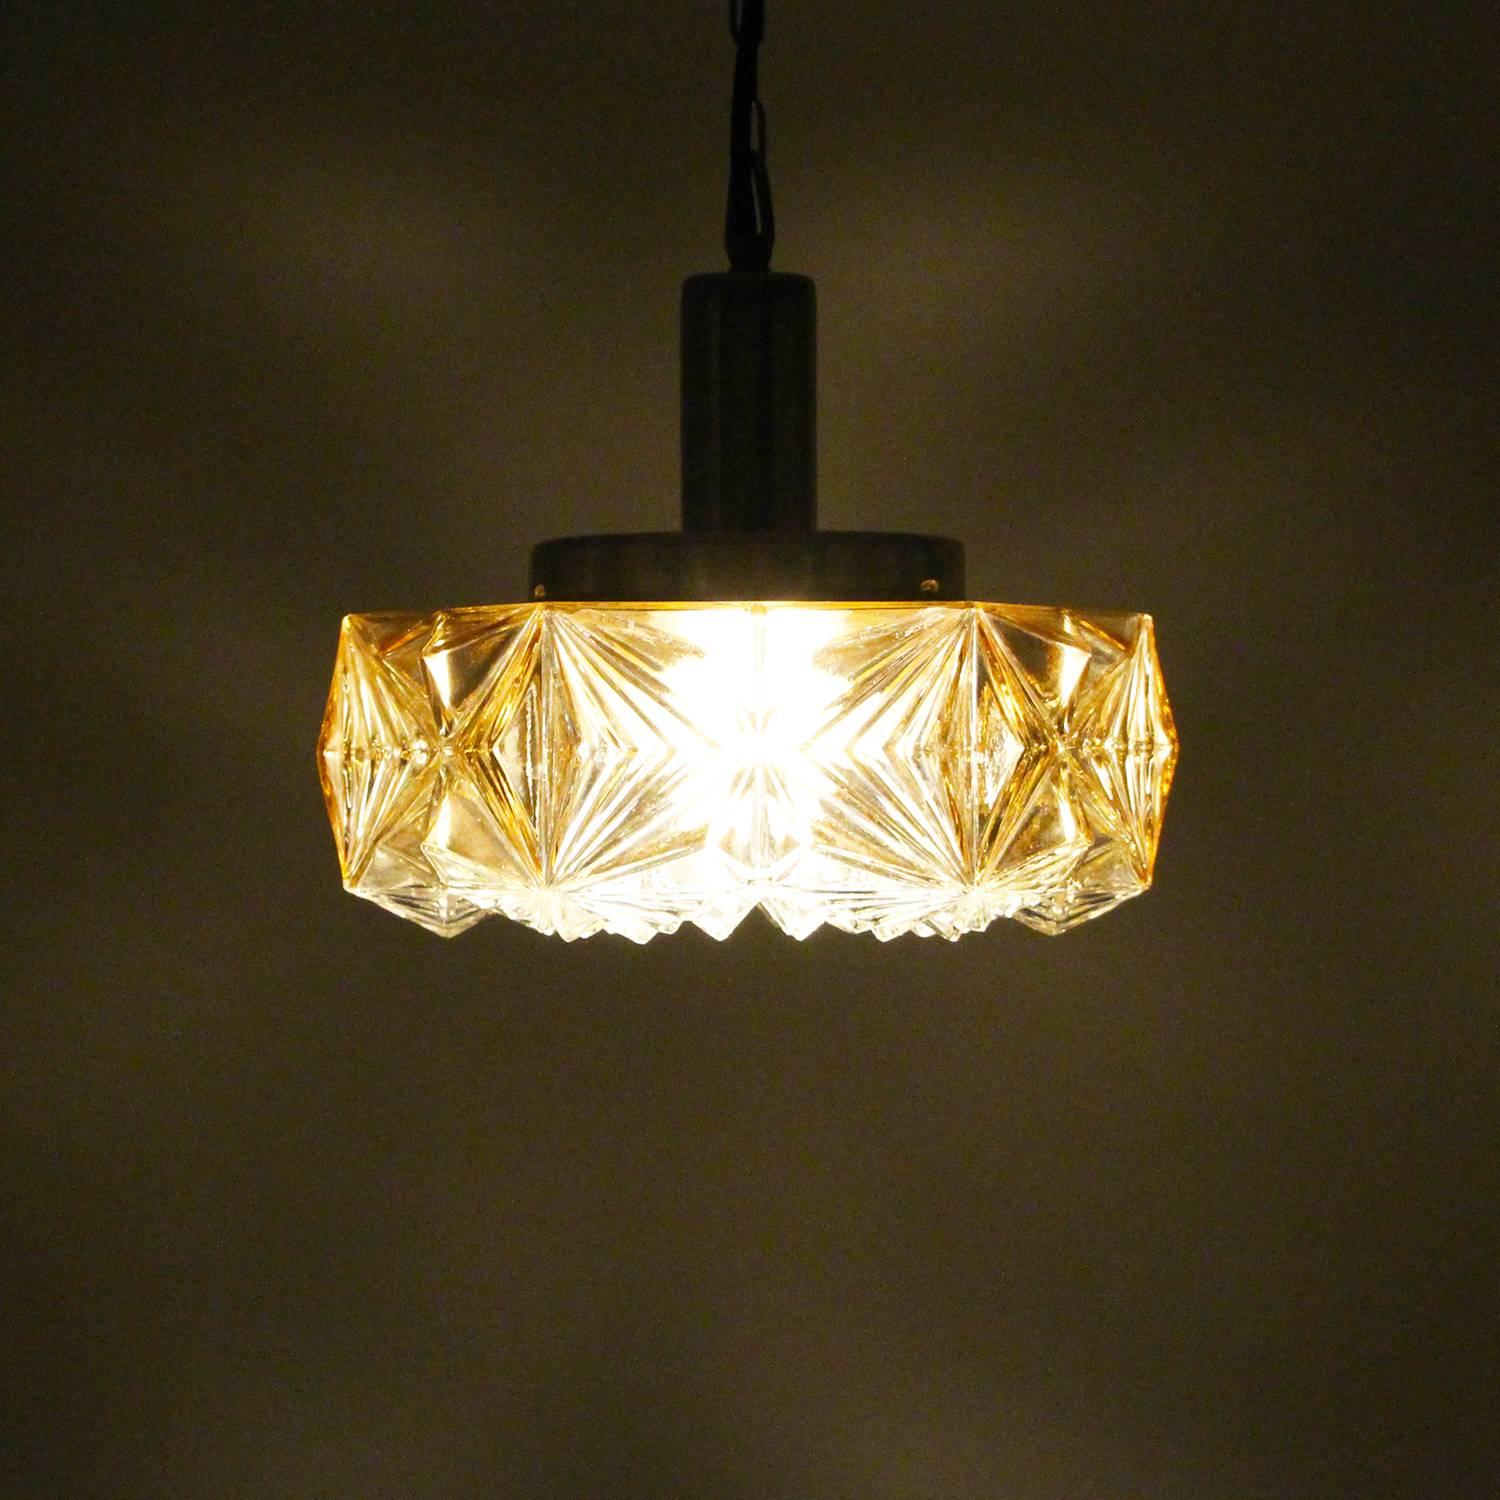 Pressed glass pendant, no. 36404 by Vitrika in the 1960s, vintage pressed glass hanging light with brass top, chain and canopy, all in very good vintage condition.

Up for sale here is a charming midcentury piece, made up by a thick pressed glass